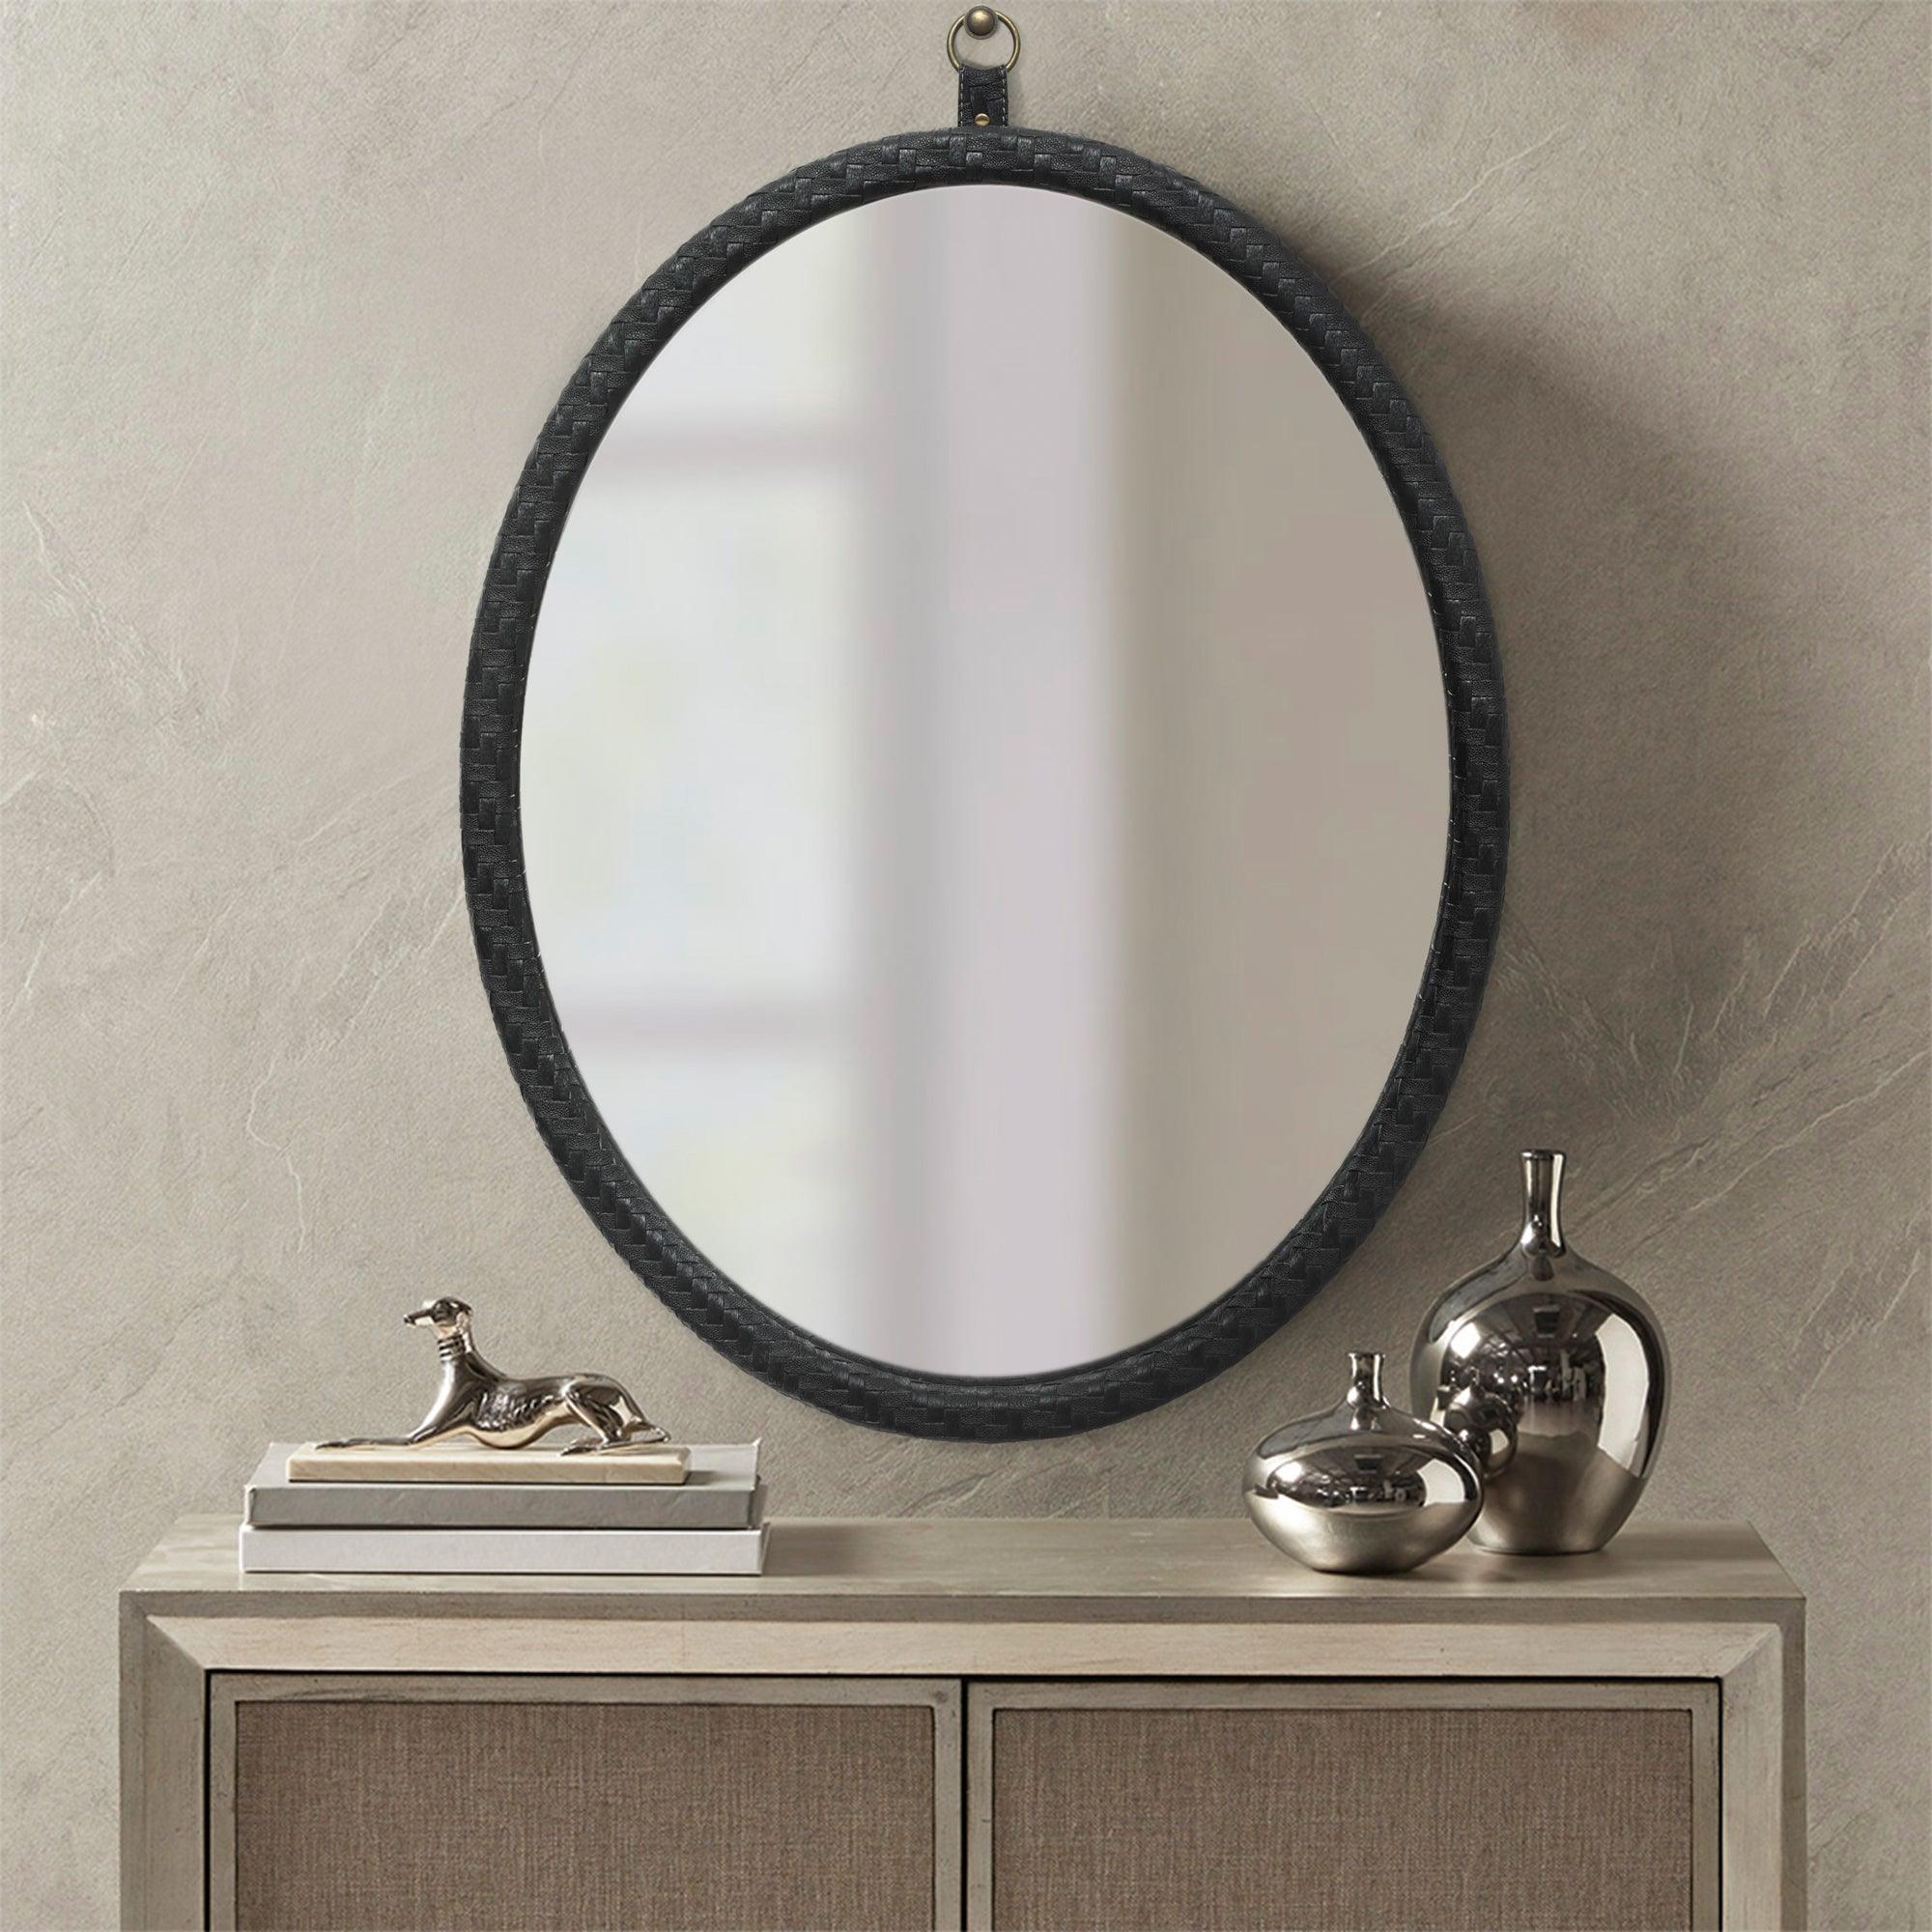 🆓🚛 Oval Black Woven Grain Decorative Wall Hanging Mirror, Pu Covered Mdf Framed Mirror for Bedroom Living Room Vanity Entryway Wall Decor, 23.62X29.92"